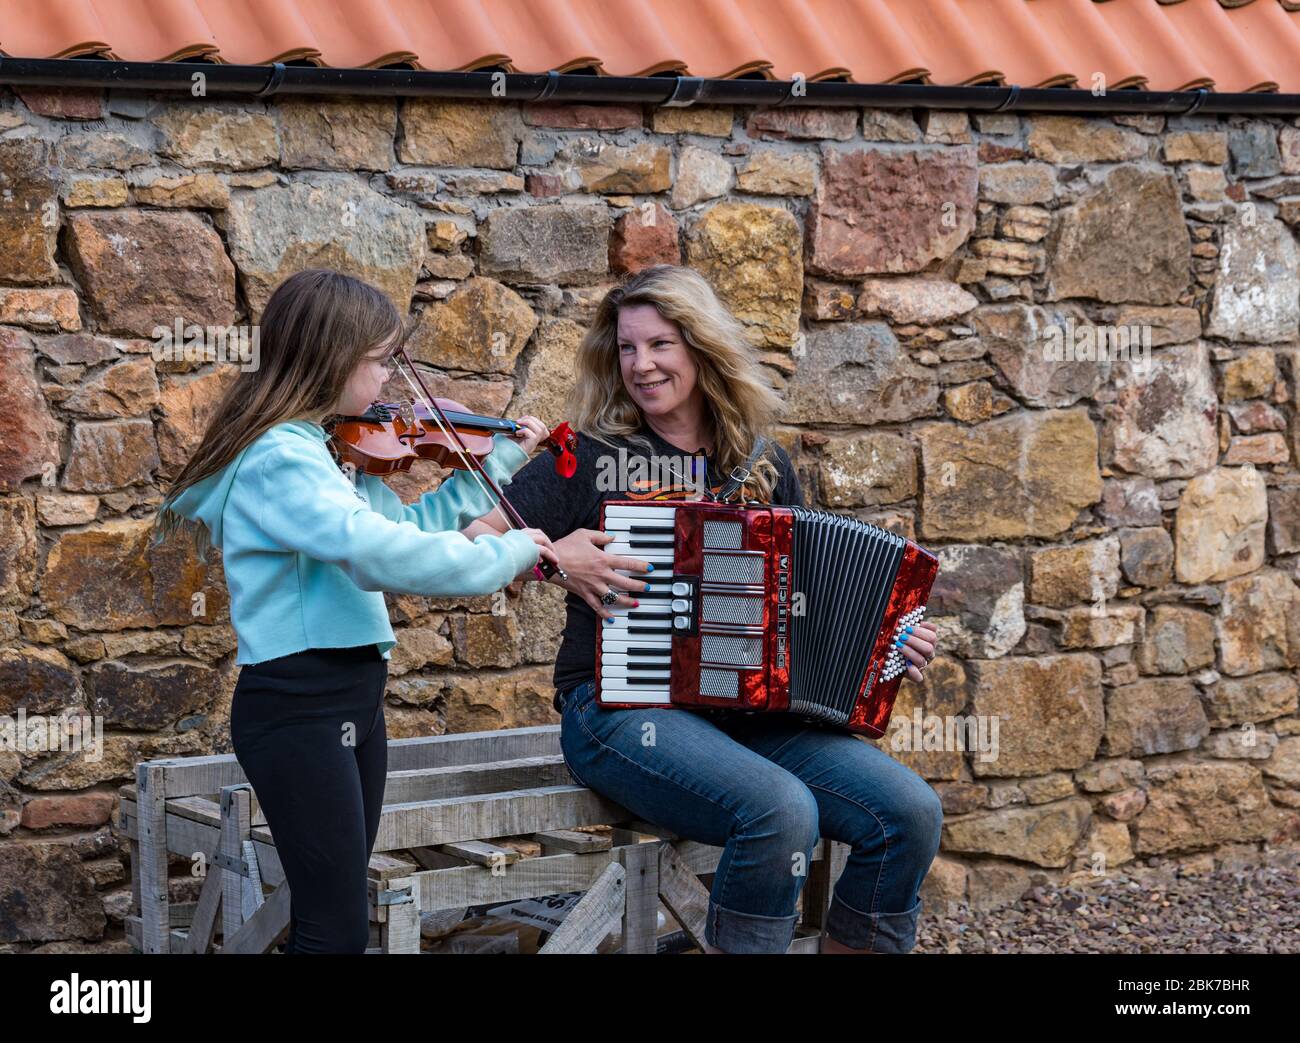 Camptoun, East Lothian, Scotland, United Kingdom. 2nd May, 2020. A community in lockdown: residents in a small rural community show what life in lockdown is like for them. Pictured: Ava, aged 10 years, and her mother, Harley, a musician, play the fiddle and accordion in the tune 'Somewhere Over the Rainbow' Stock Photo